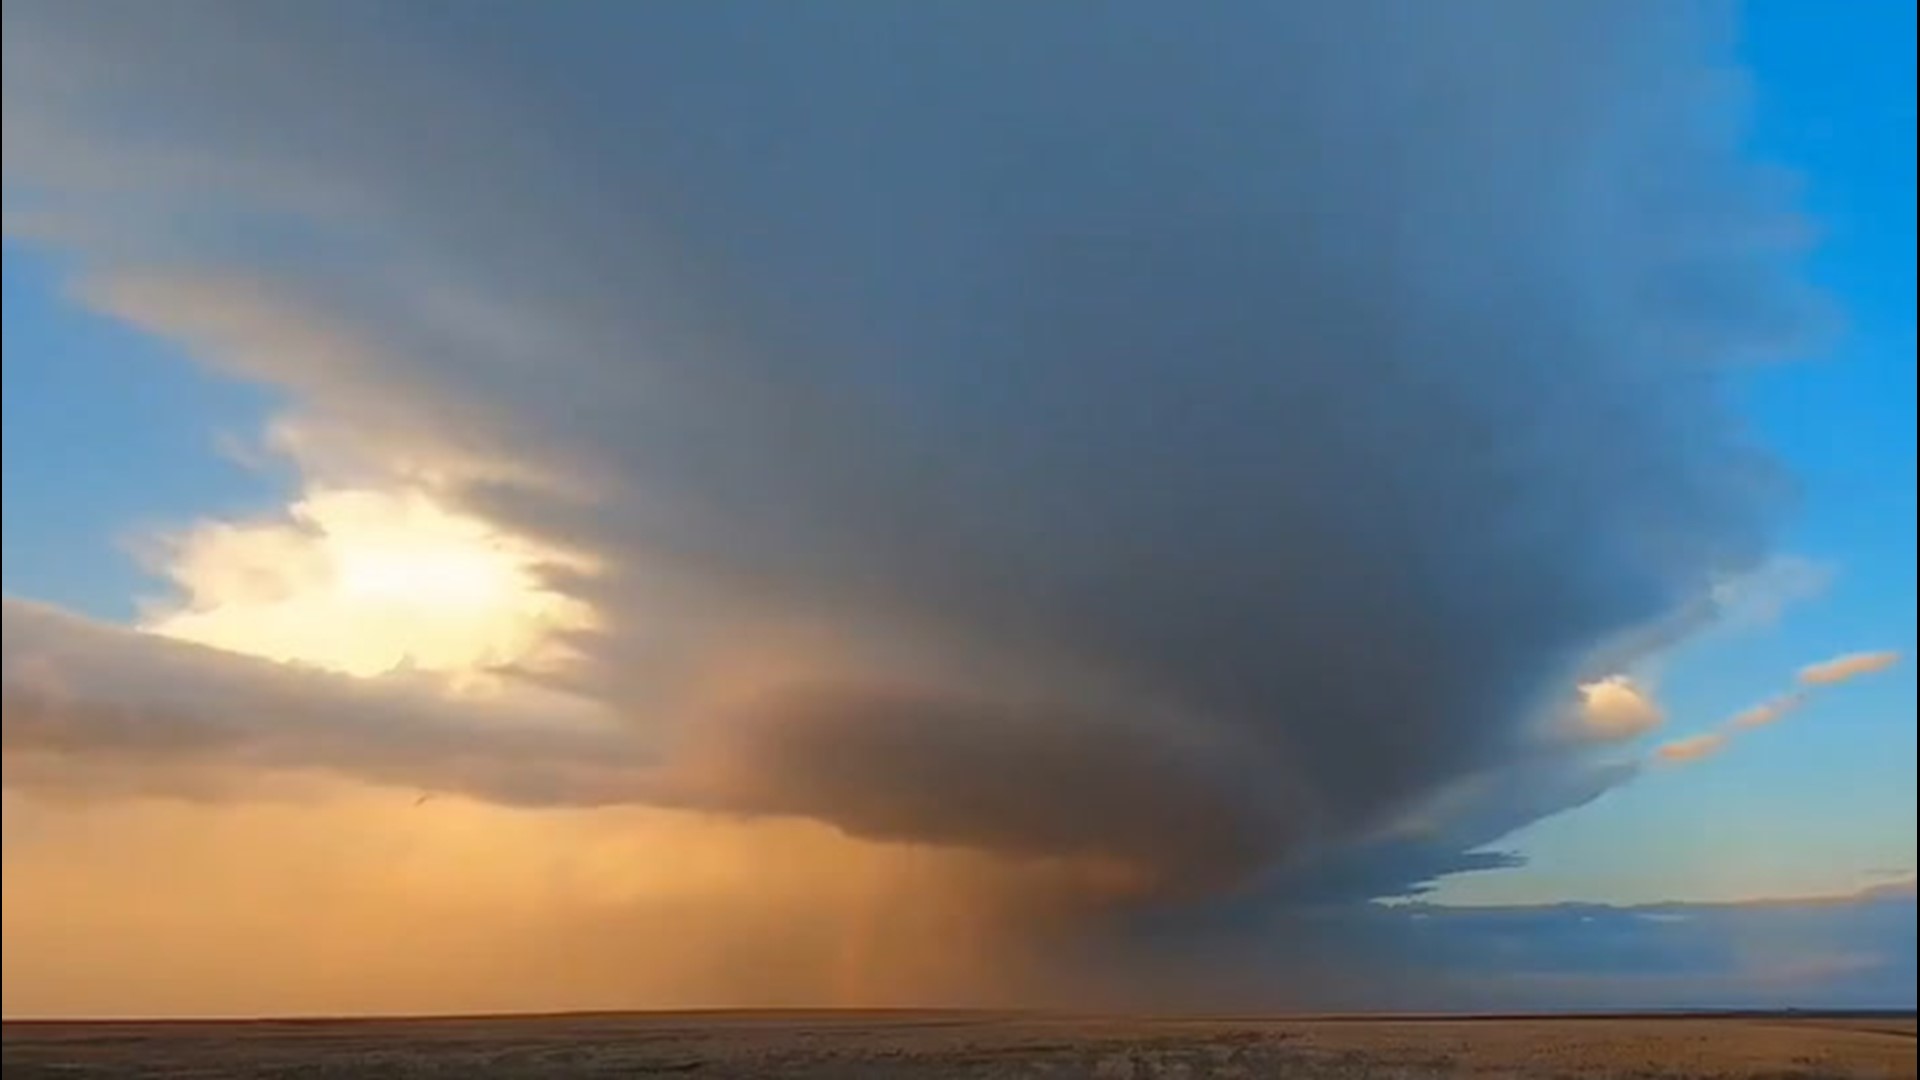 Stunning time-lapse video of a passing storm in Kansas | fox61.com